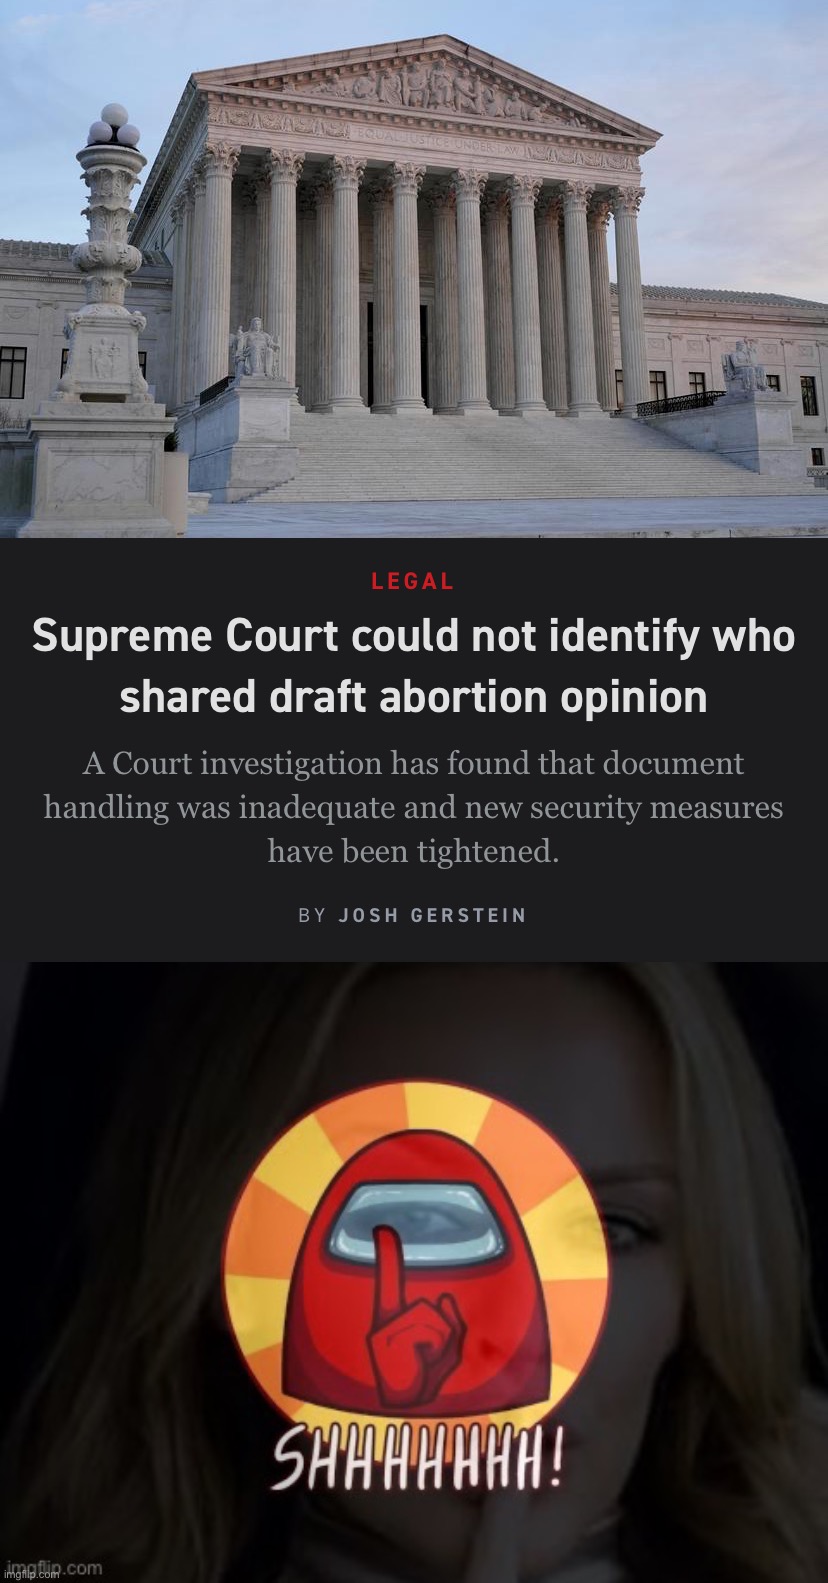 Dang, that sucks. I feel really bad that this person or people will never be brought to justice | image tagged in supreme court could not identify leaker,kylie imposter shhh,scotus,supreme court,shhhh,among us shhhhhh | made w/ Imgflip meme maker